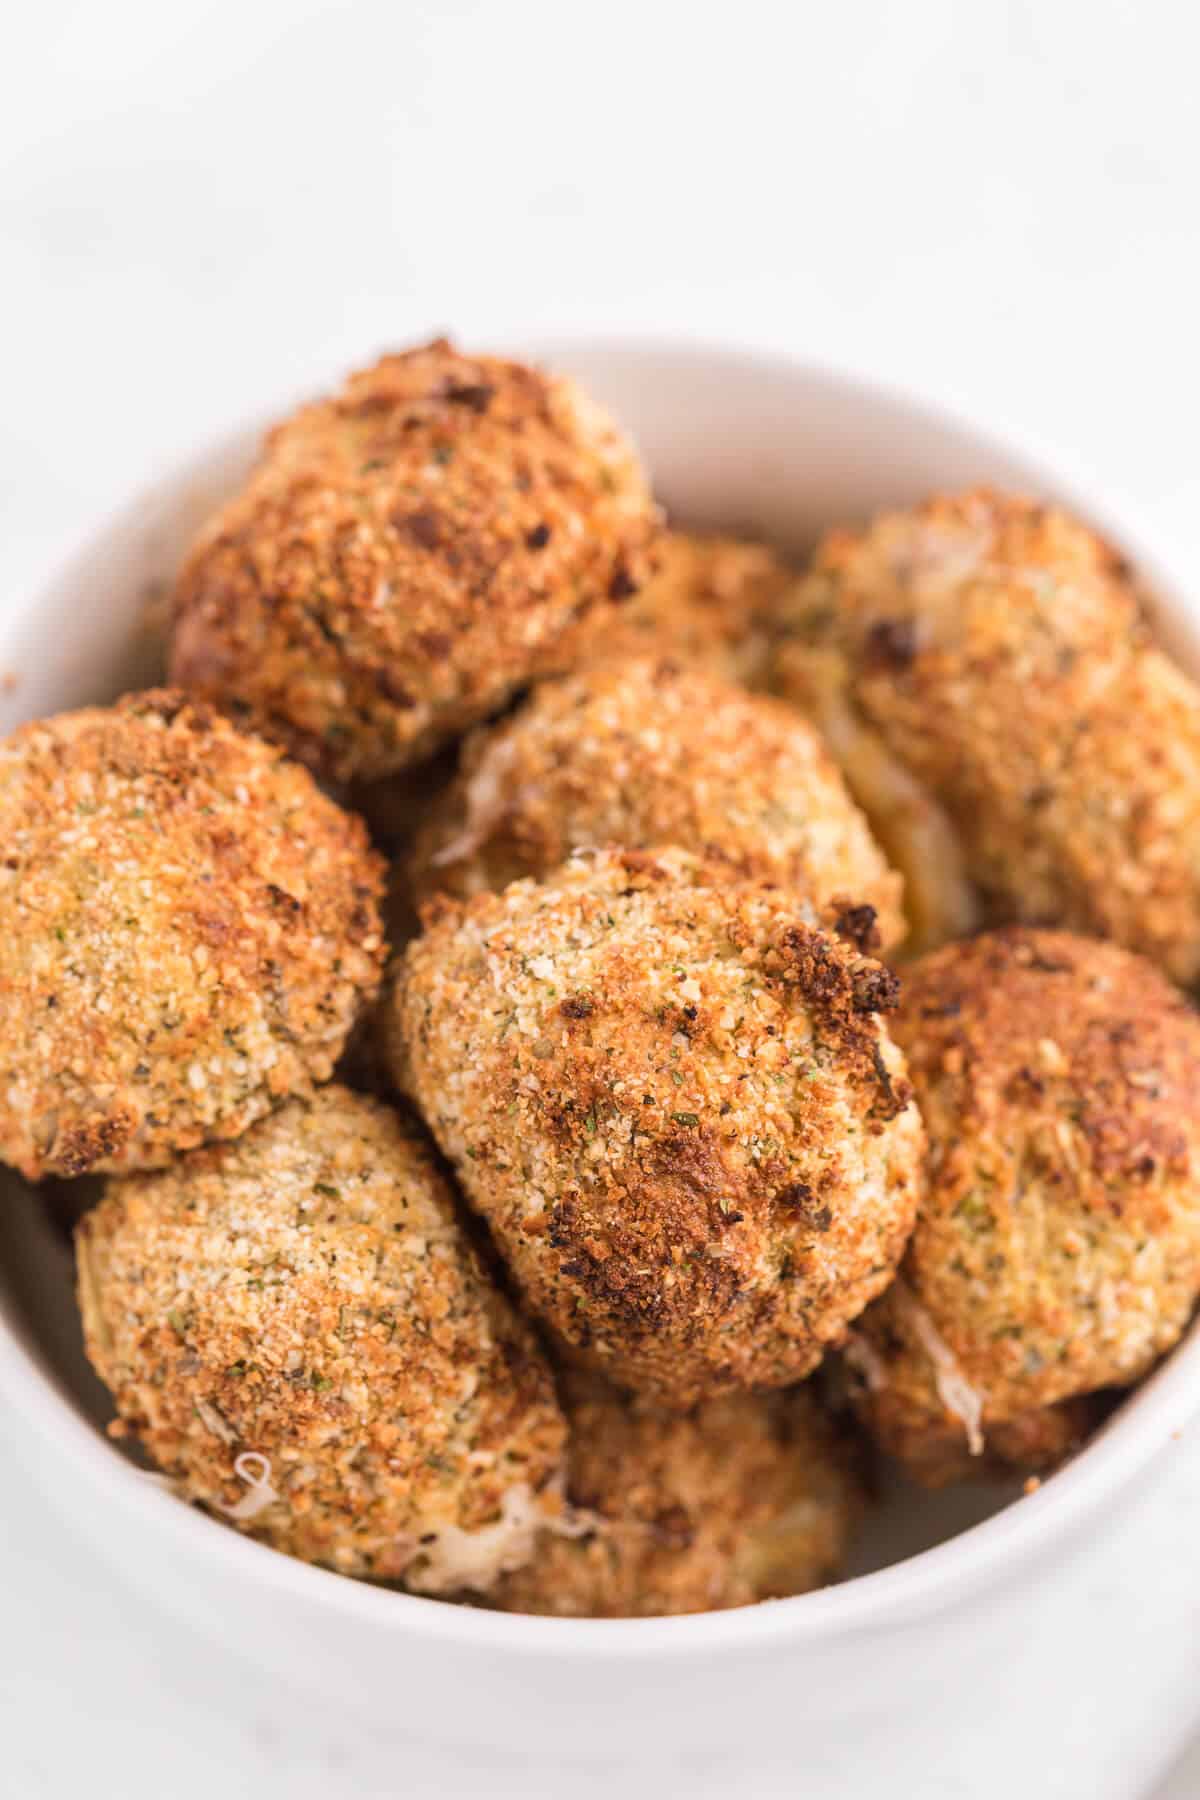 Air Fryer Mozzarella Balls - These homemade cheeseballs are bite sized, super seasoned, and air fried in minutes! A great make-ahead snack or appetizer.